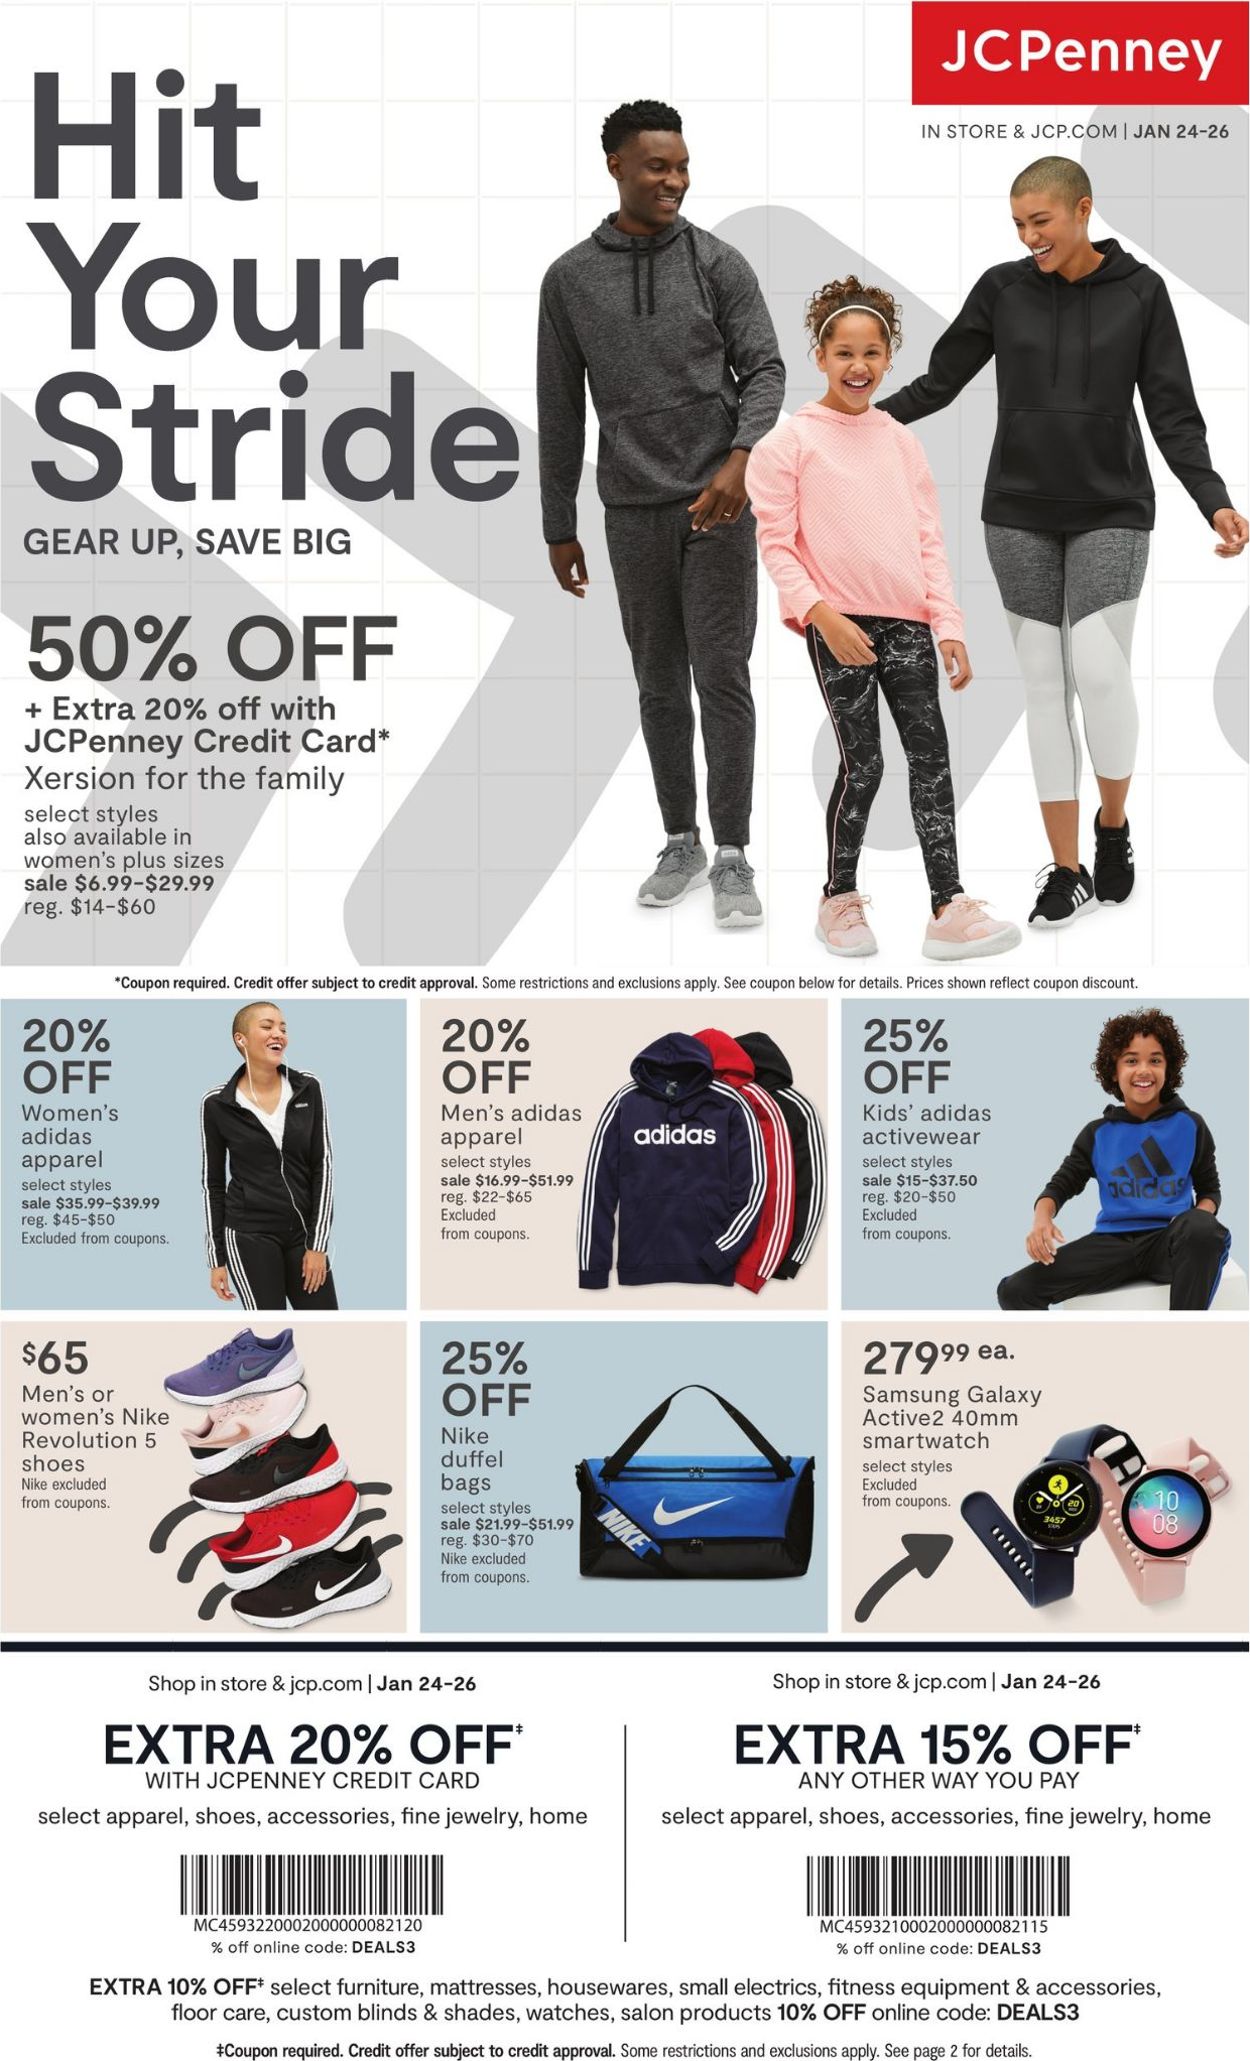 jcpenney womens adidas